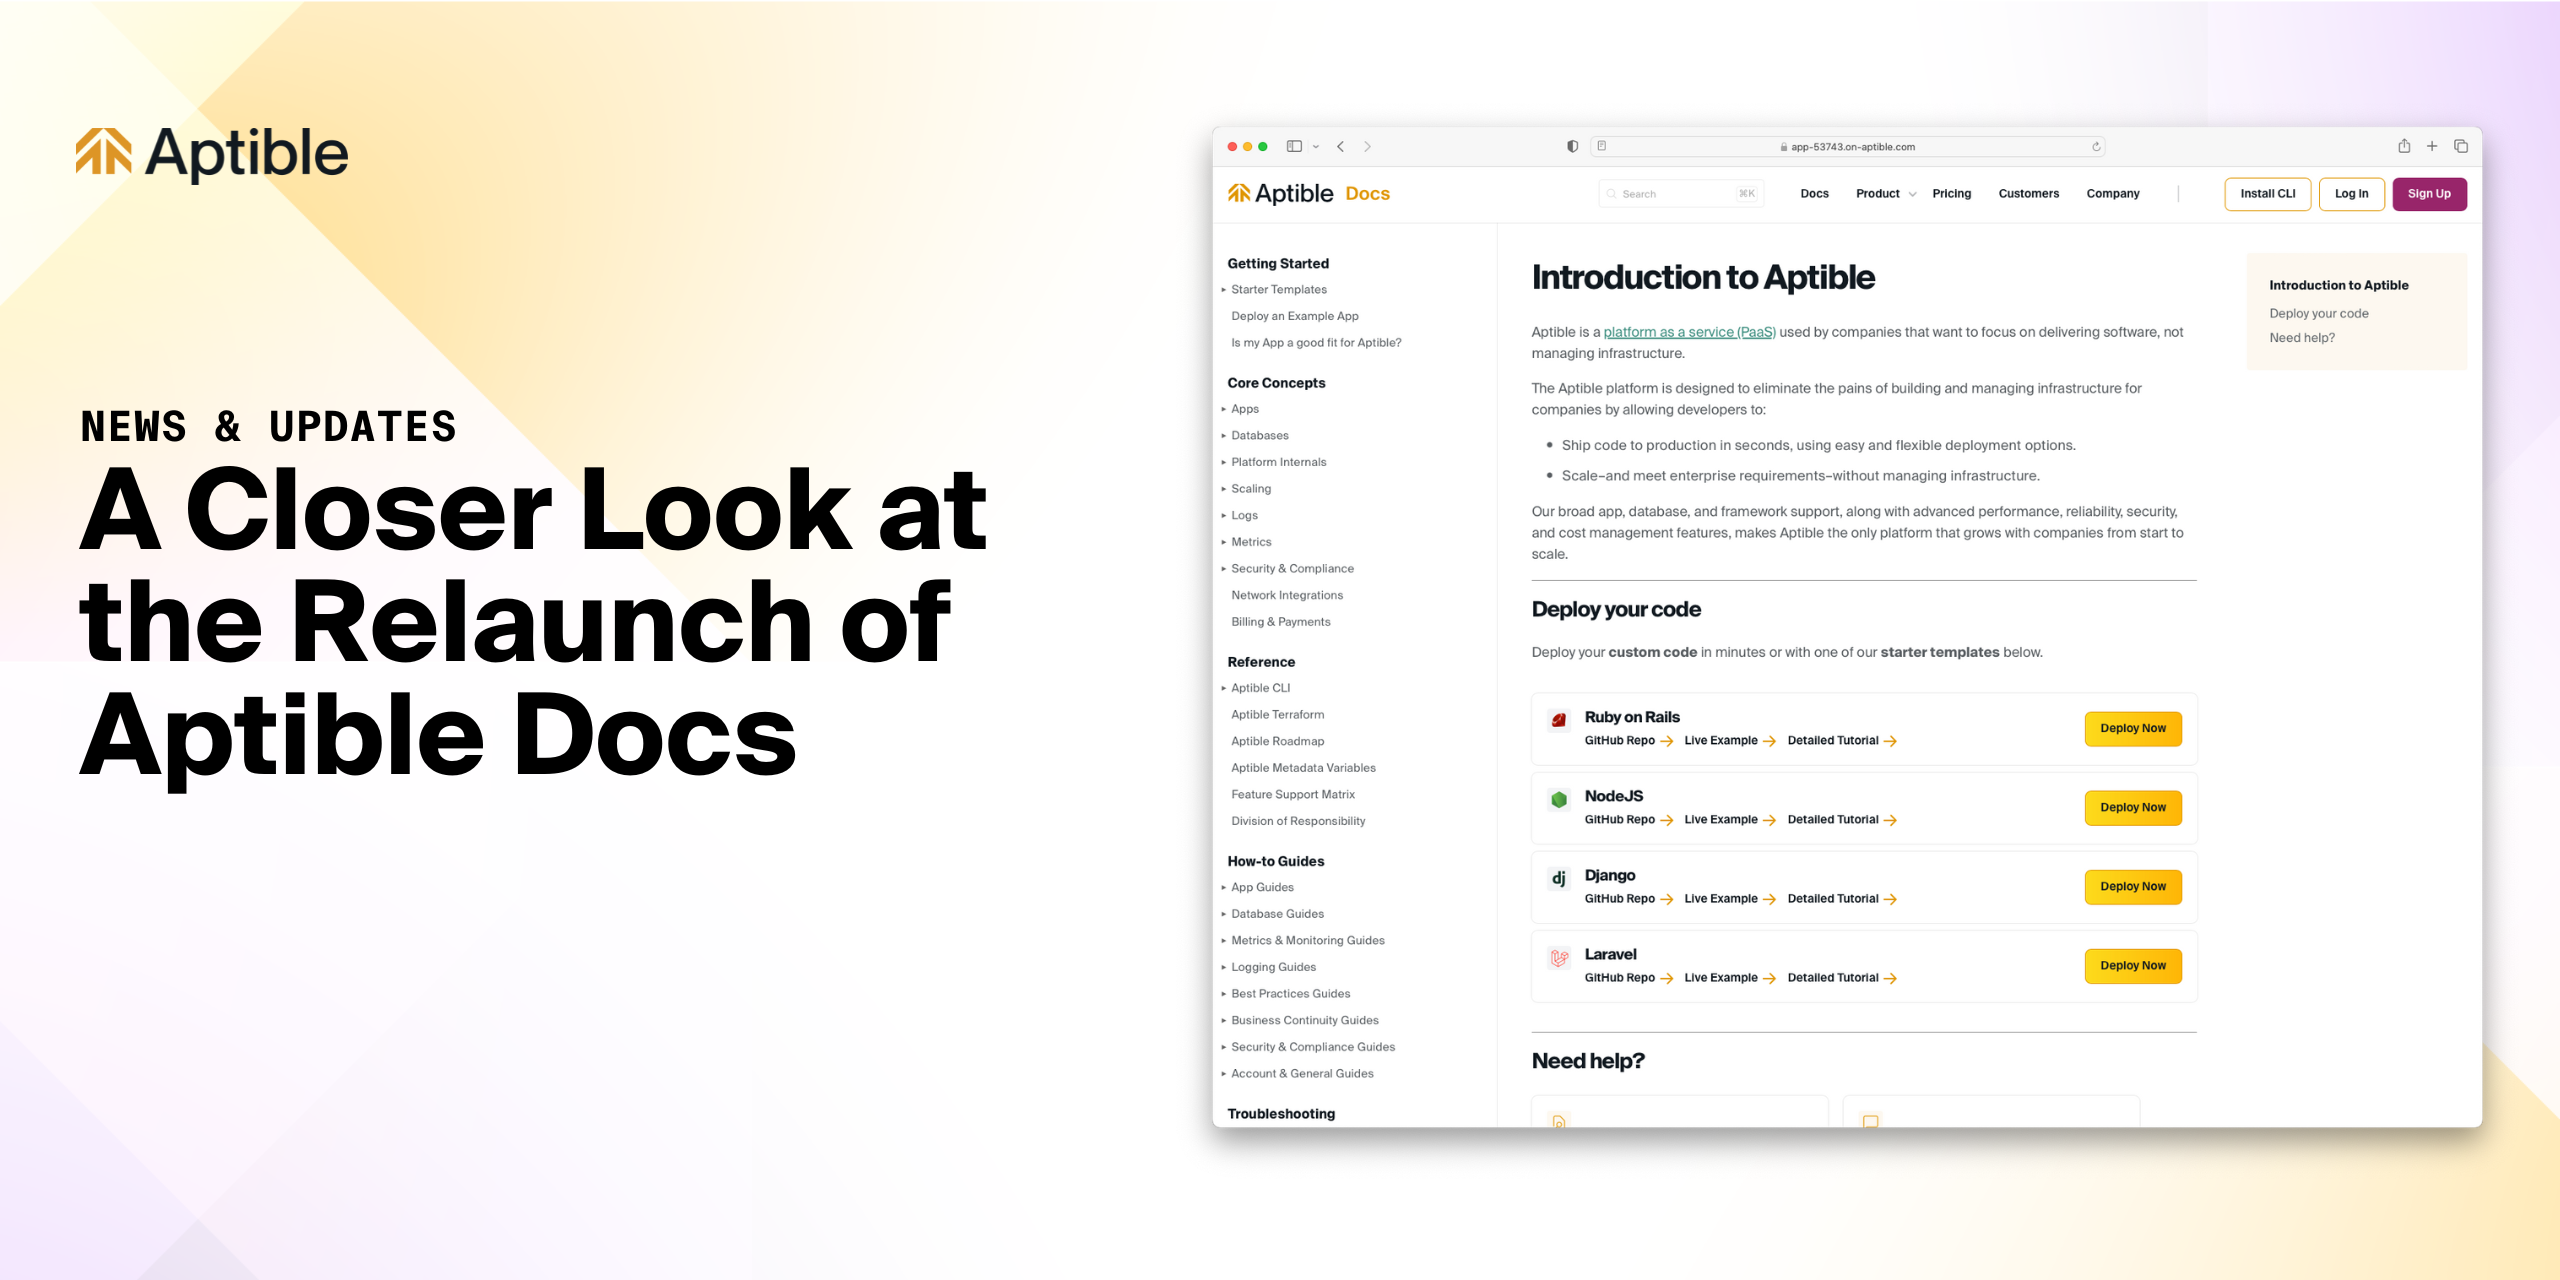 A Closer Look at the Relaunch of Aptible Docs